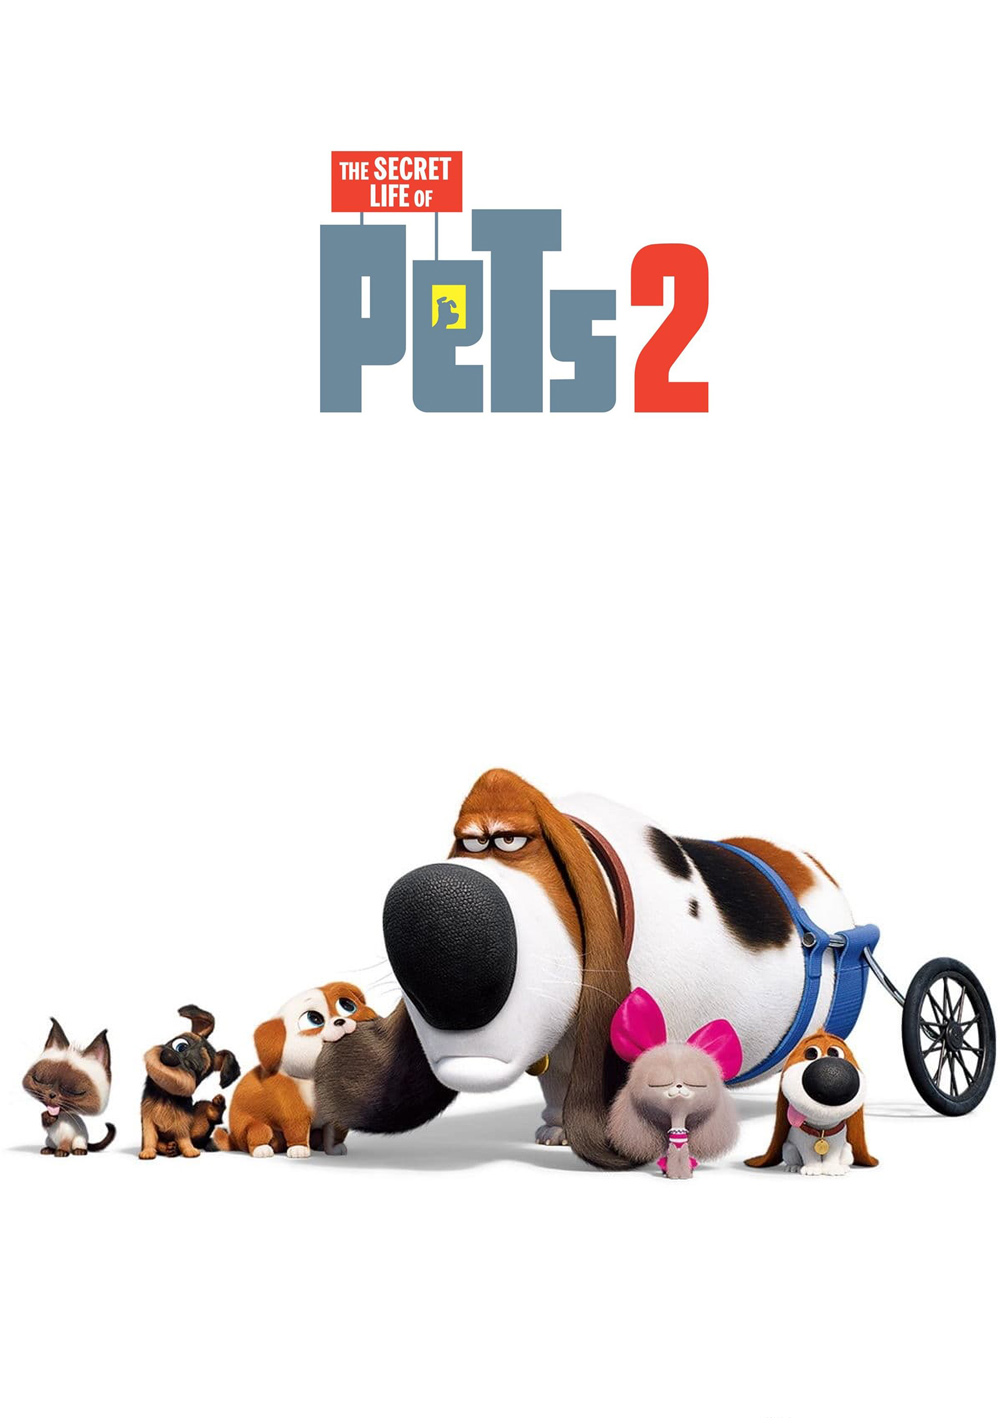 The Secret Life Of Pets 2 Movie Wallpapers